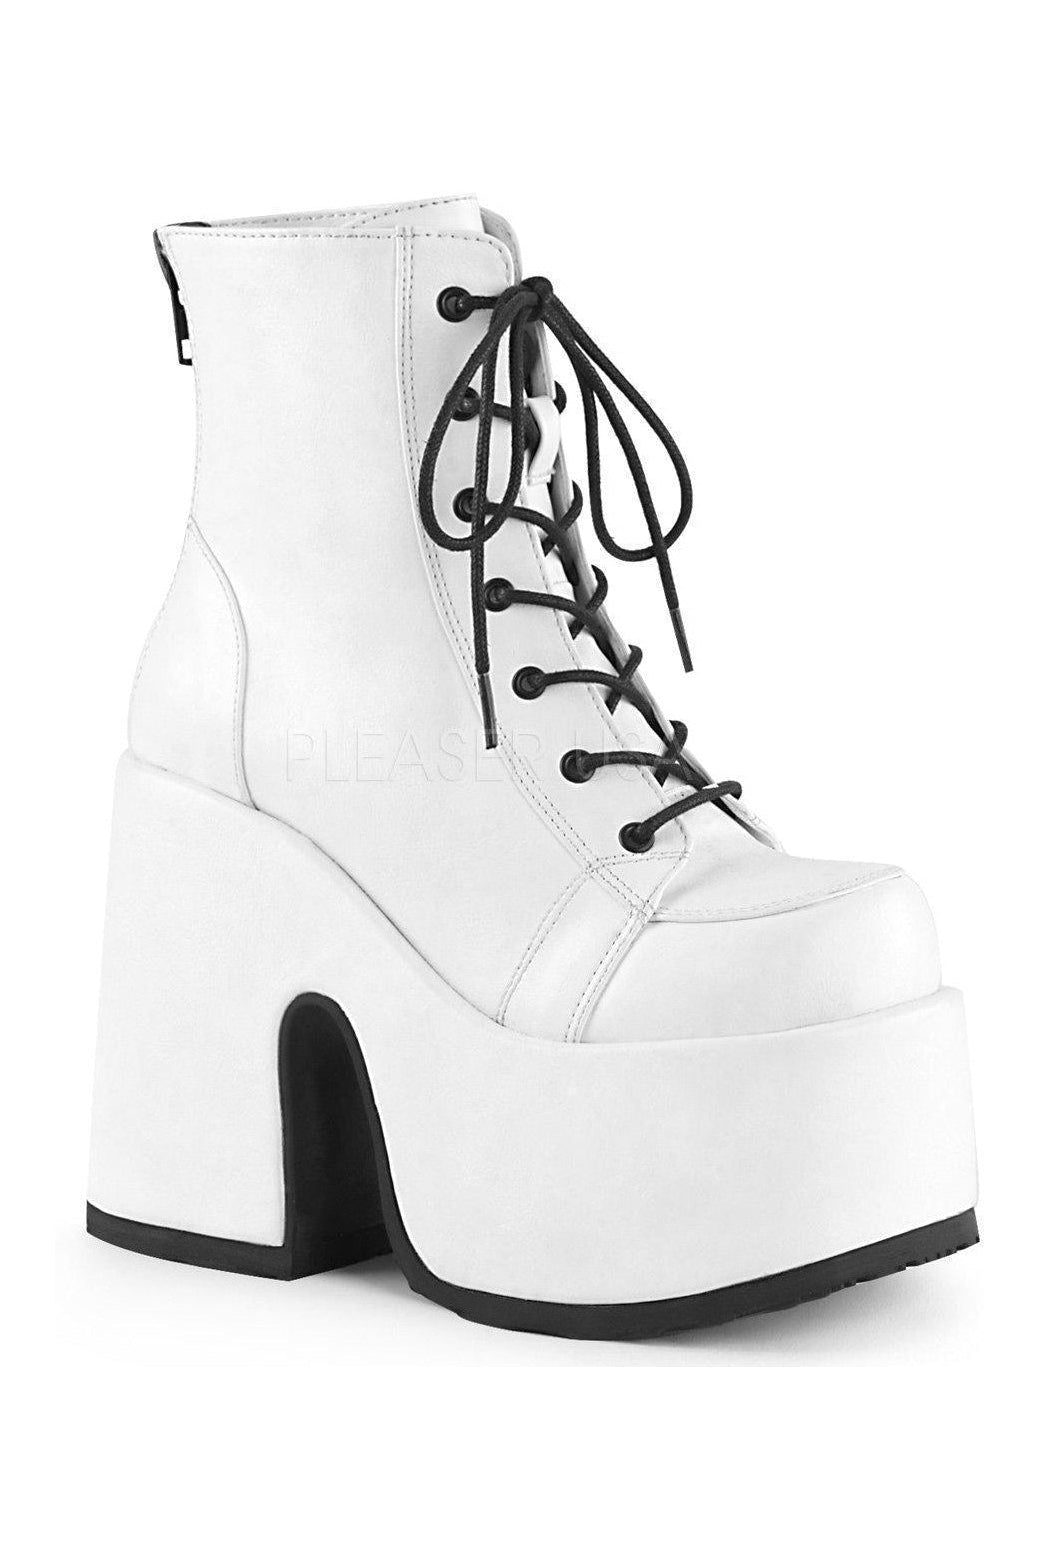 CAMEL-203 Demonia Ankle Boot | White Faux Leather-Demonia-SEXYSHOES.COM